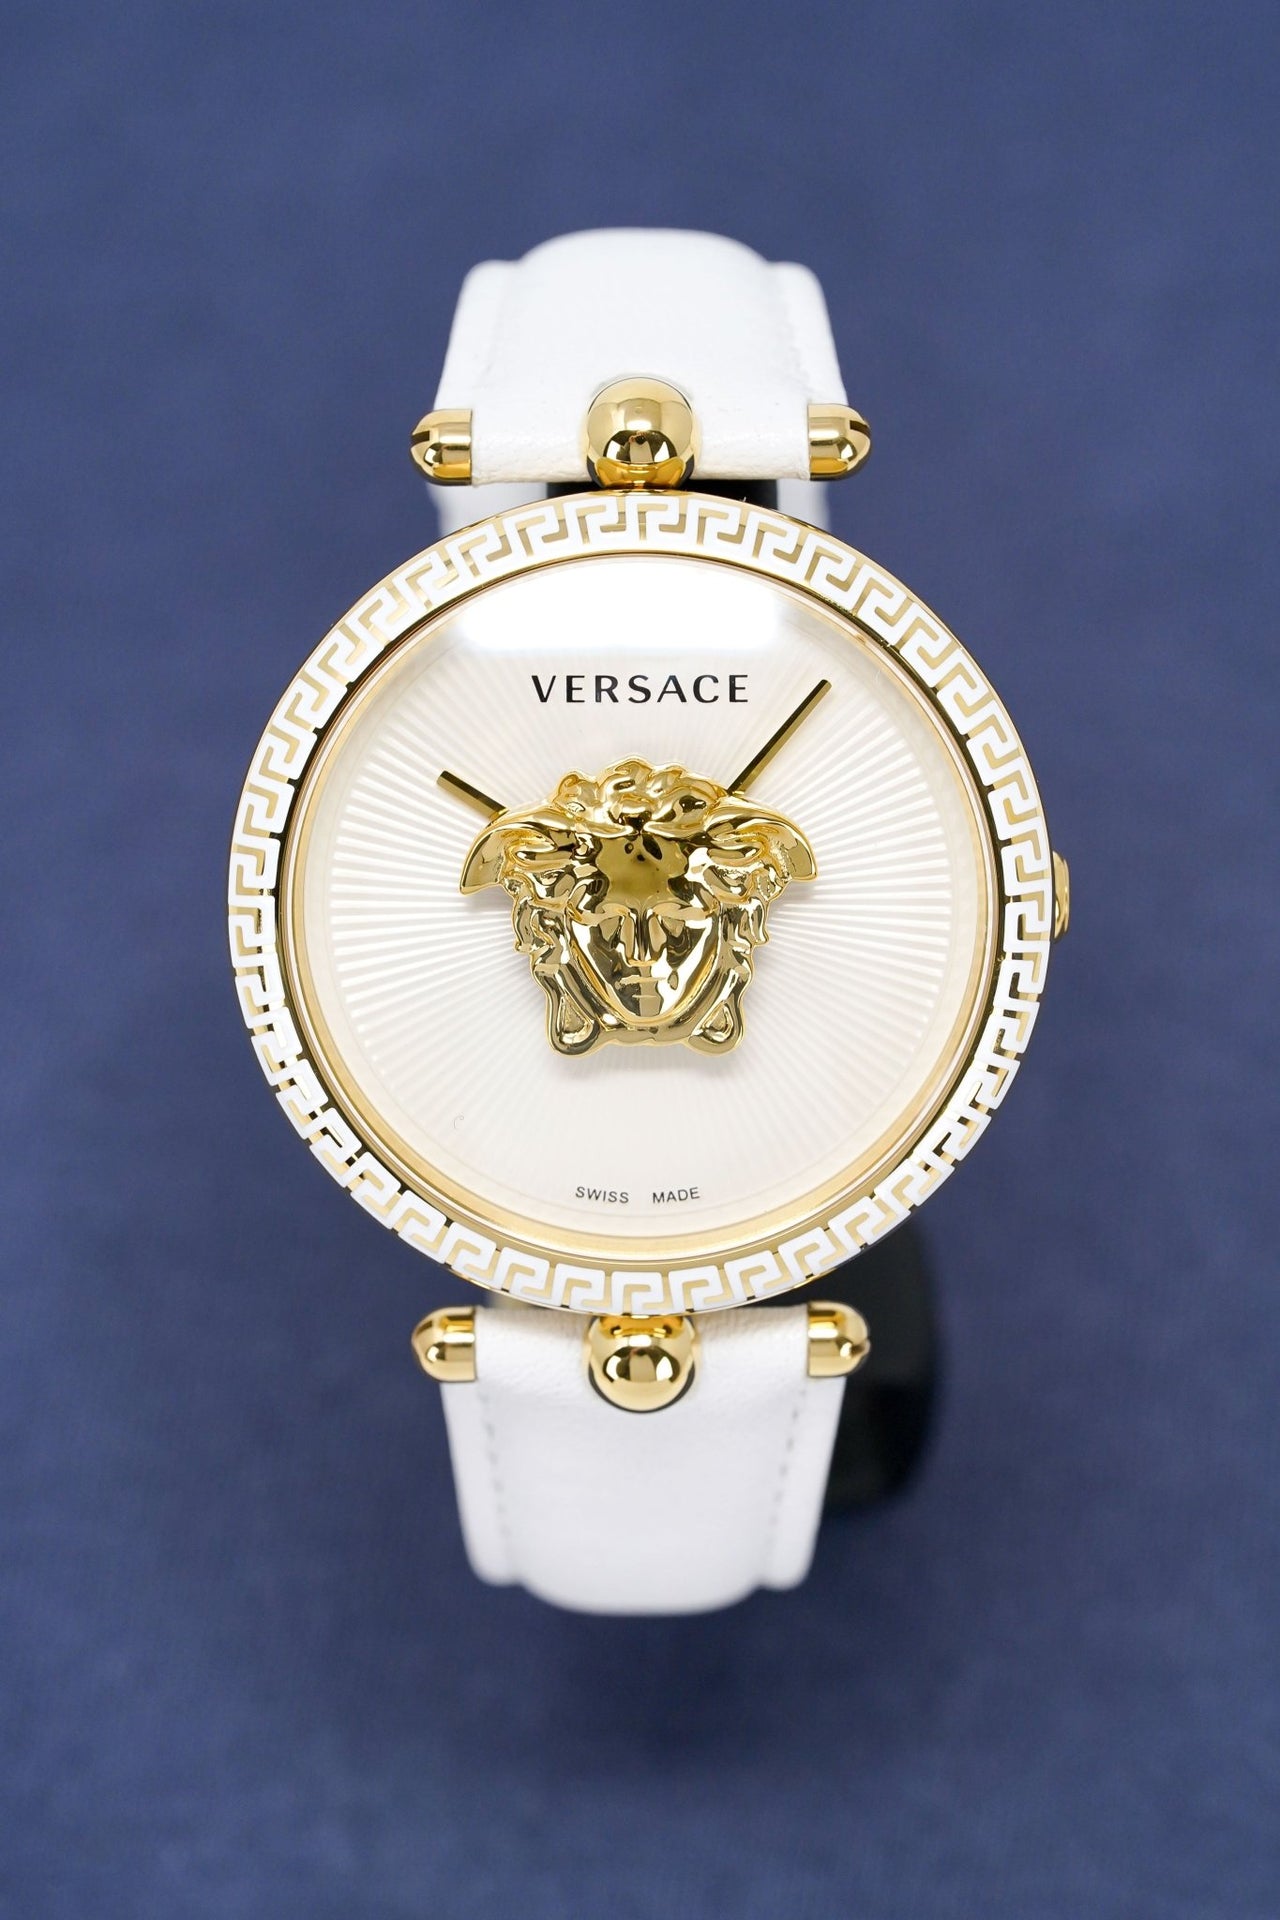 Versace Ladies Watch Palazzo Empire White Gold VECO02022 - Watches & Crystals